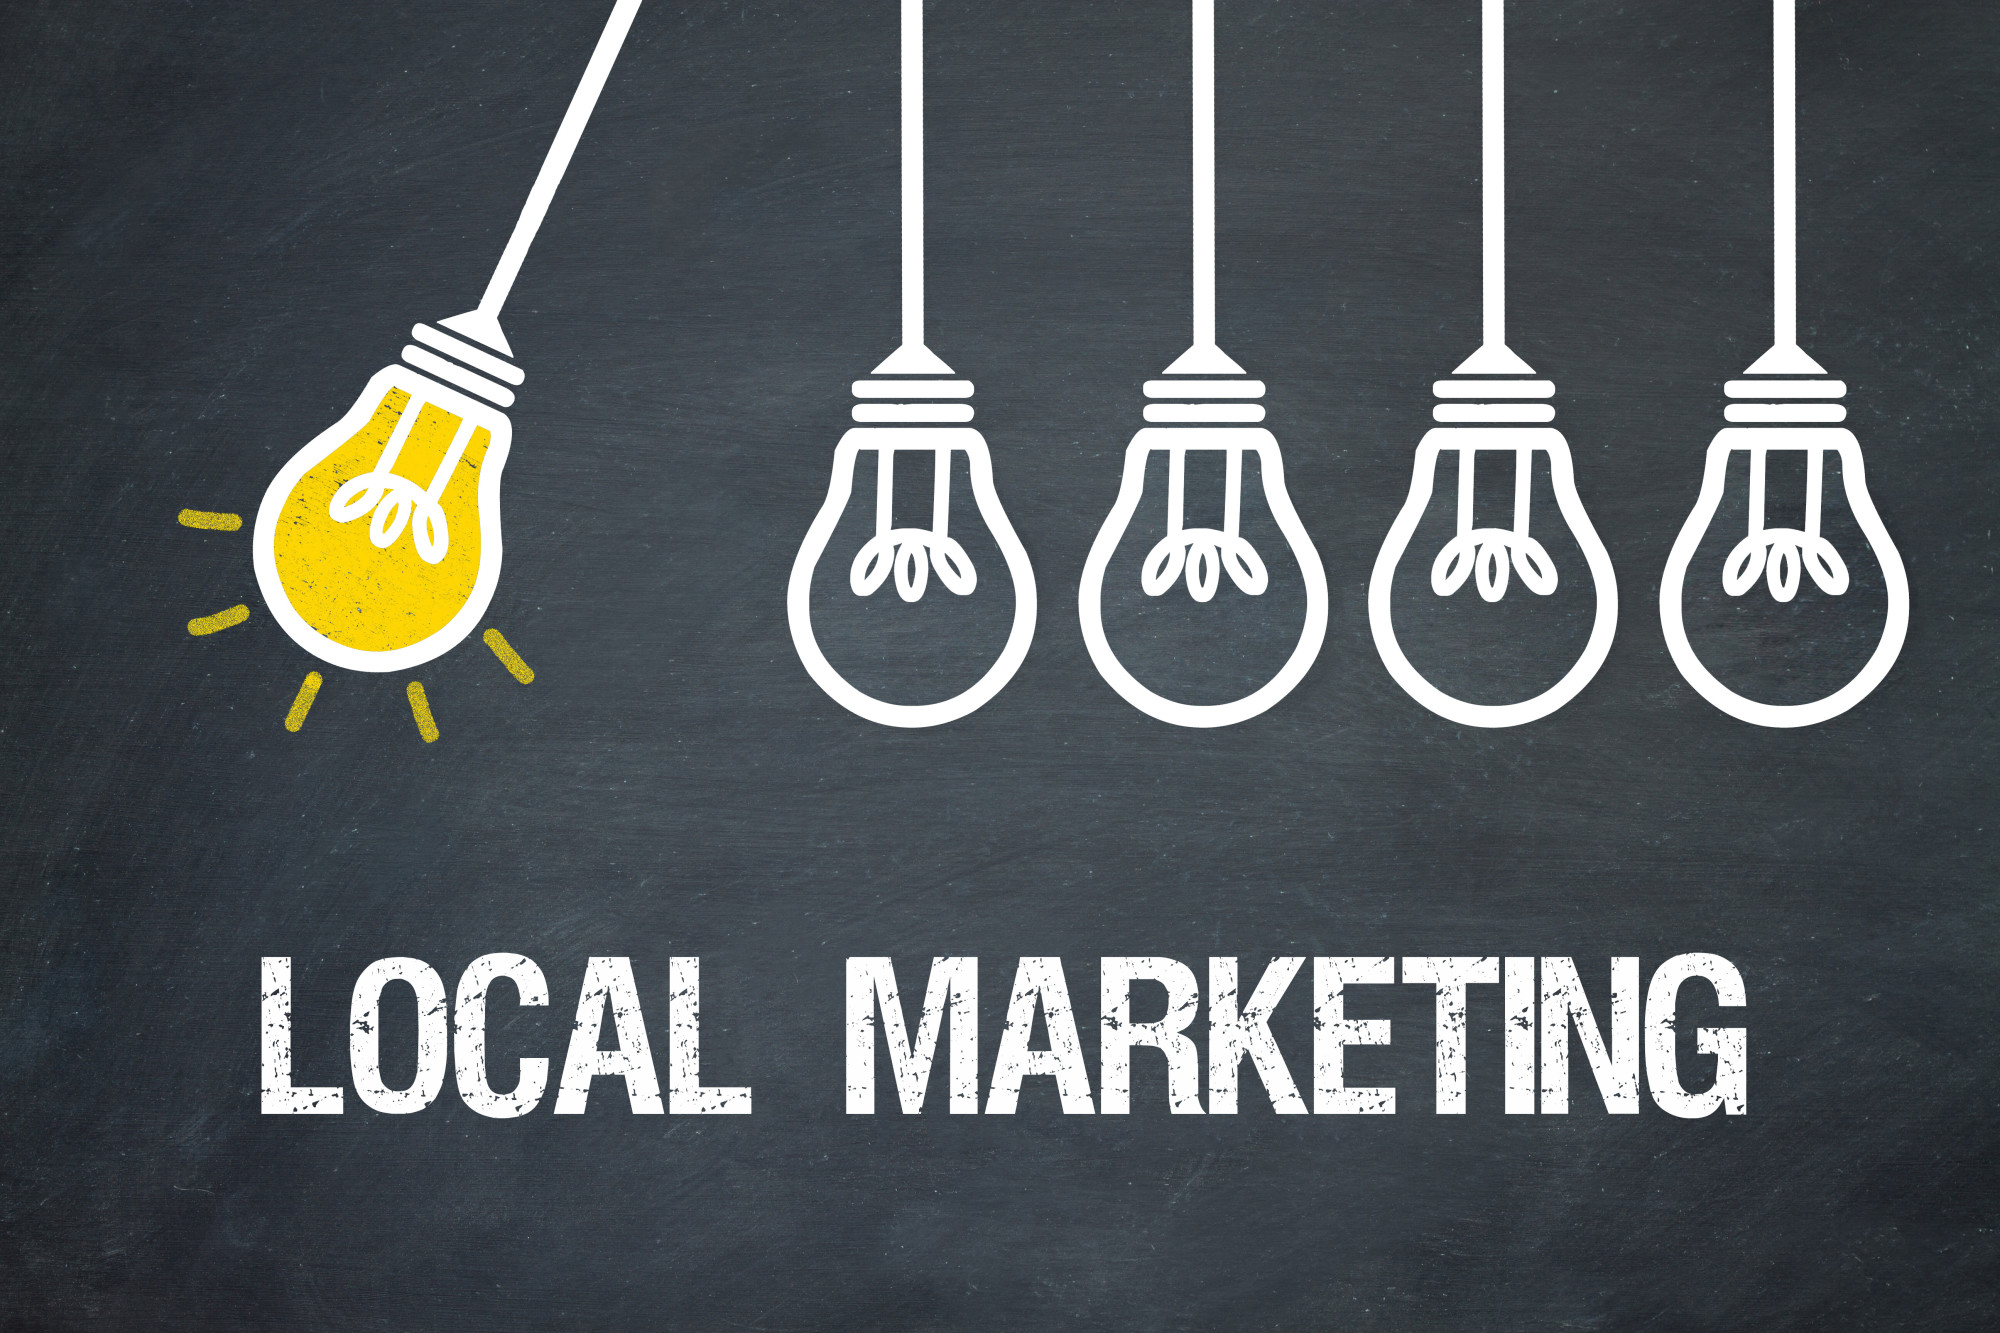 local marketing and lightbulb icons